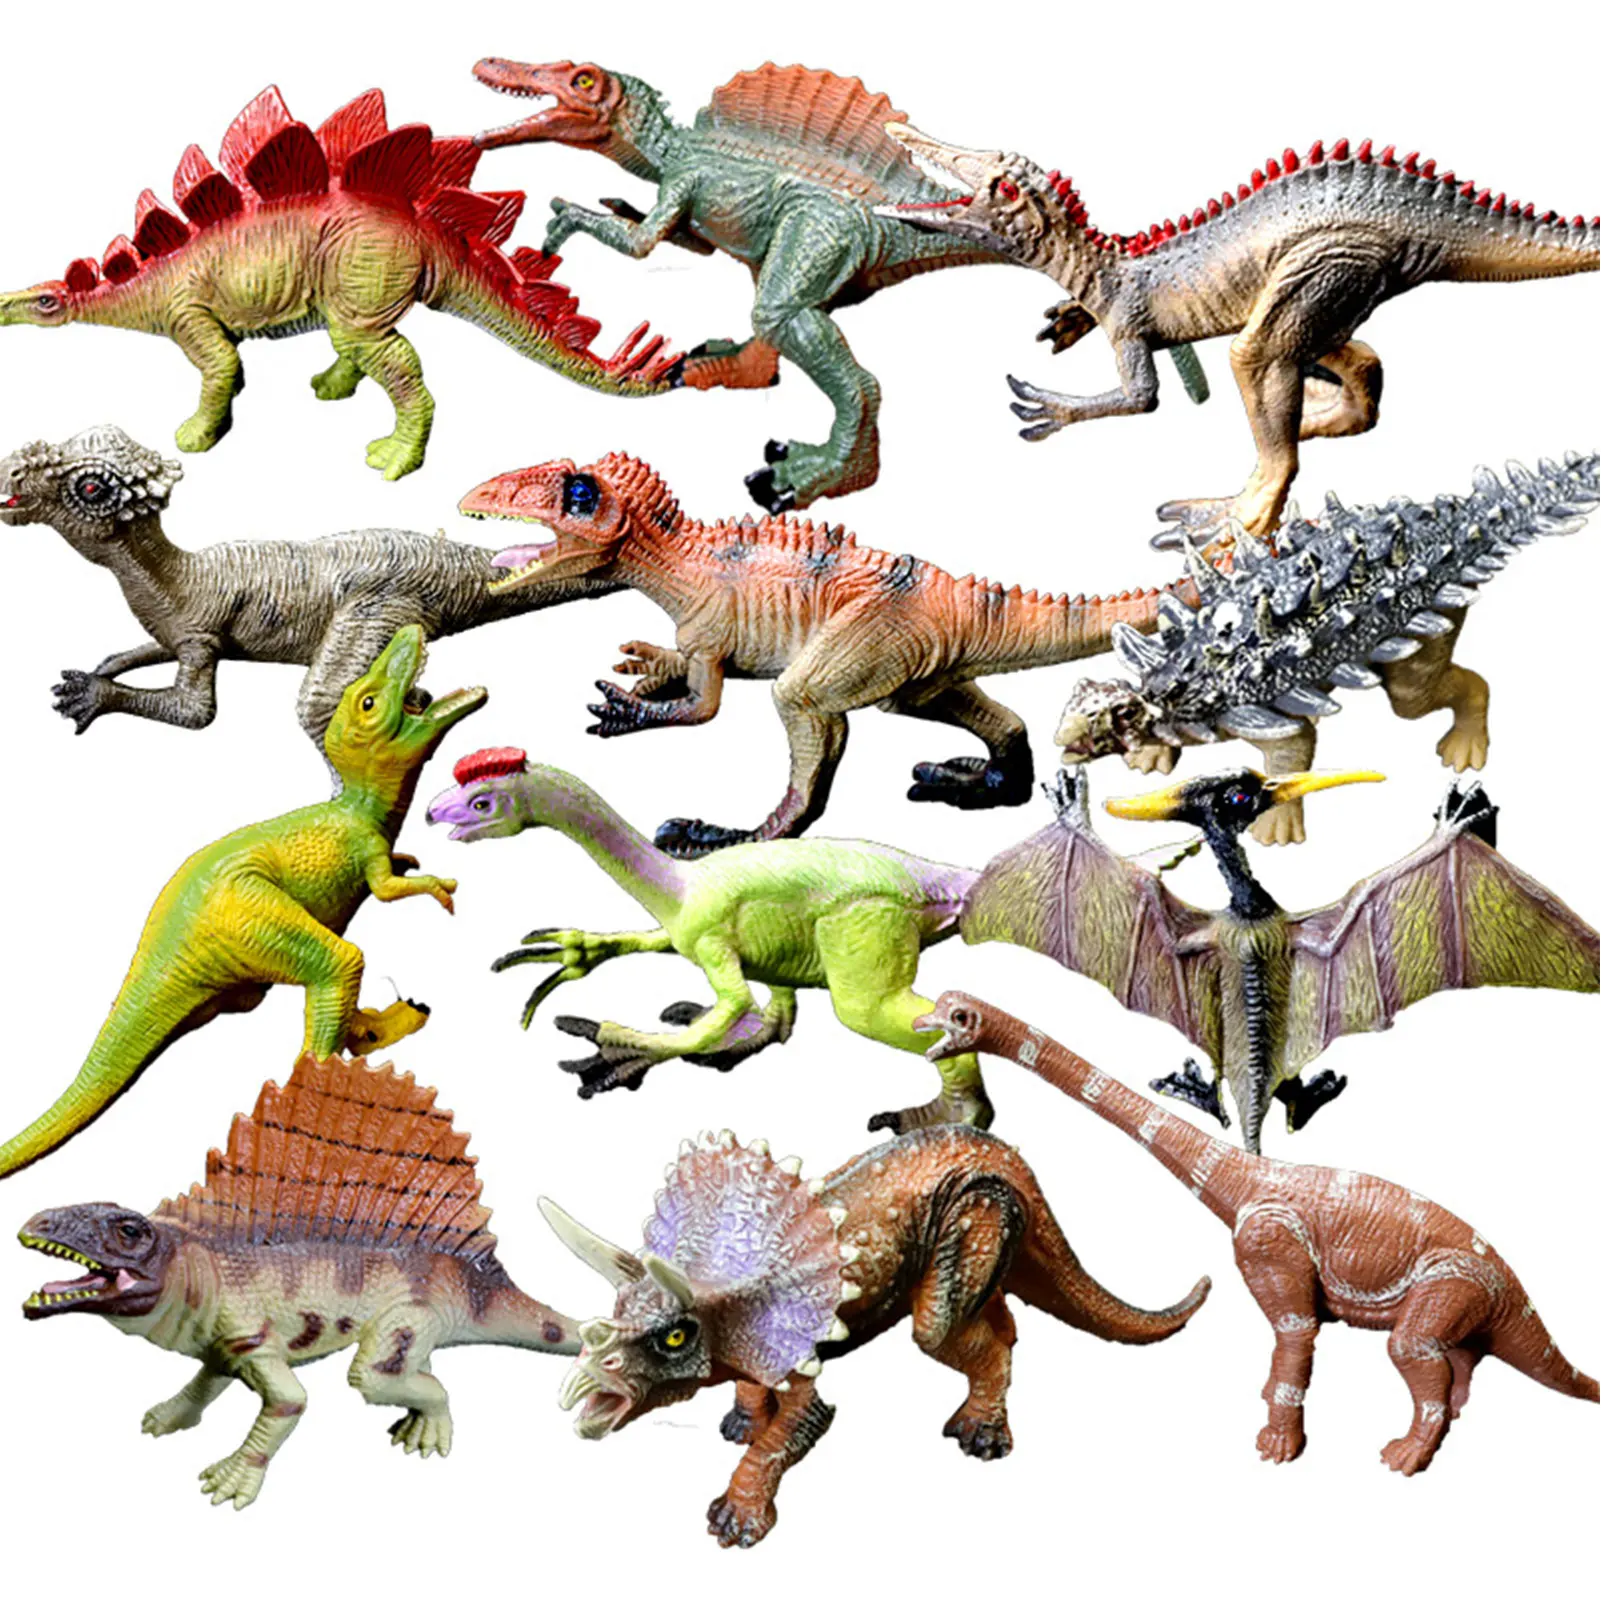 

4pcs Realistic Dinosaur Set Highly Detailed Dinosaur Gift Toys For Children Boys Party Enthusiast Home Decor L5